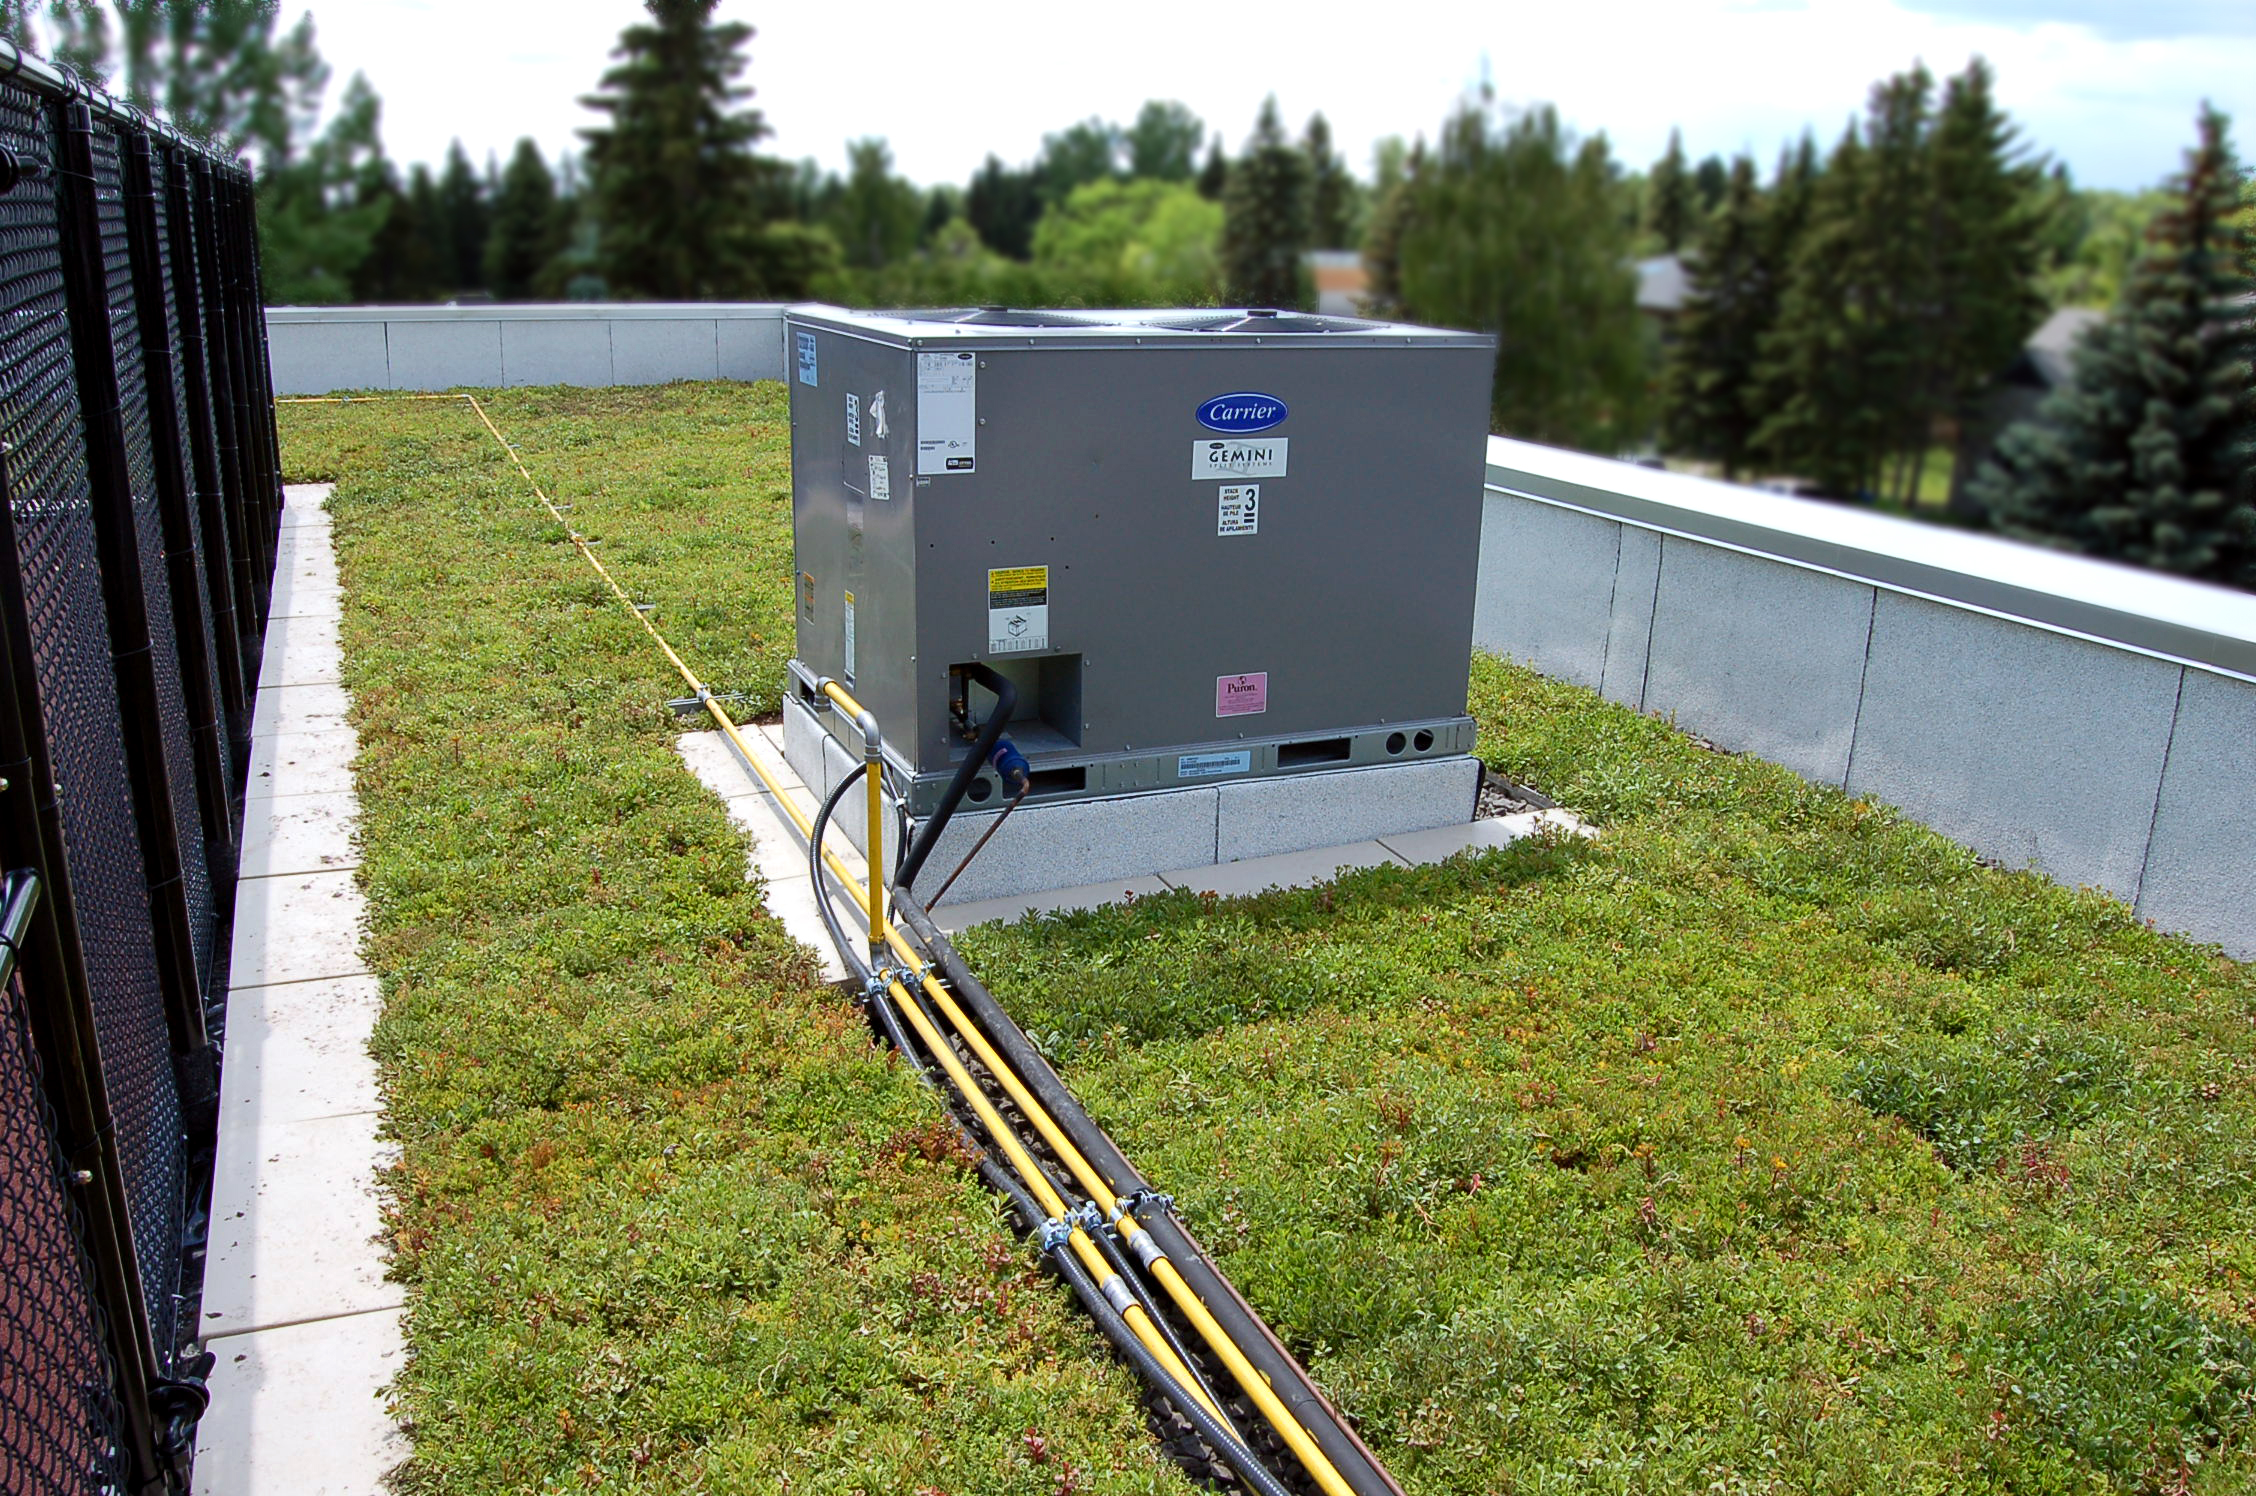 The LiveRoof vegetated roof system helps reduce cooling costs.